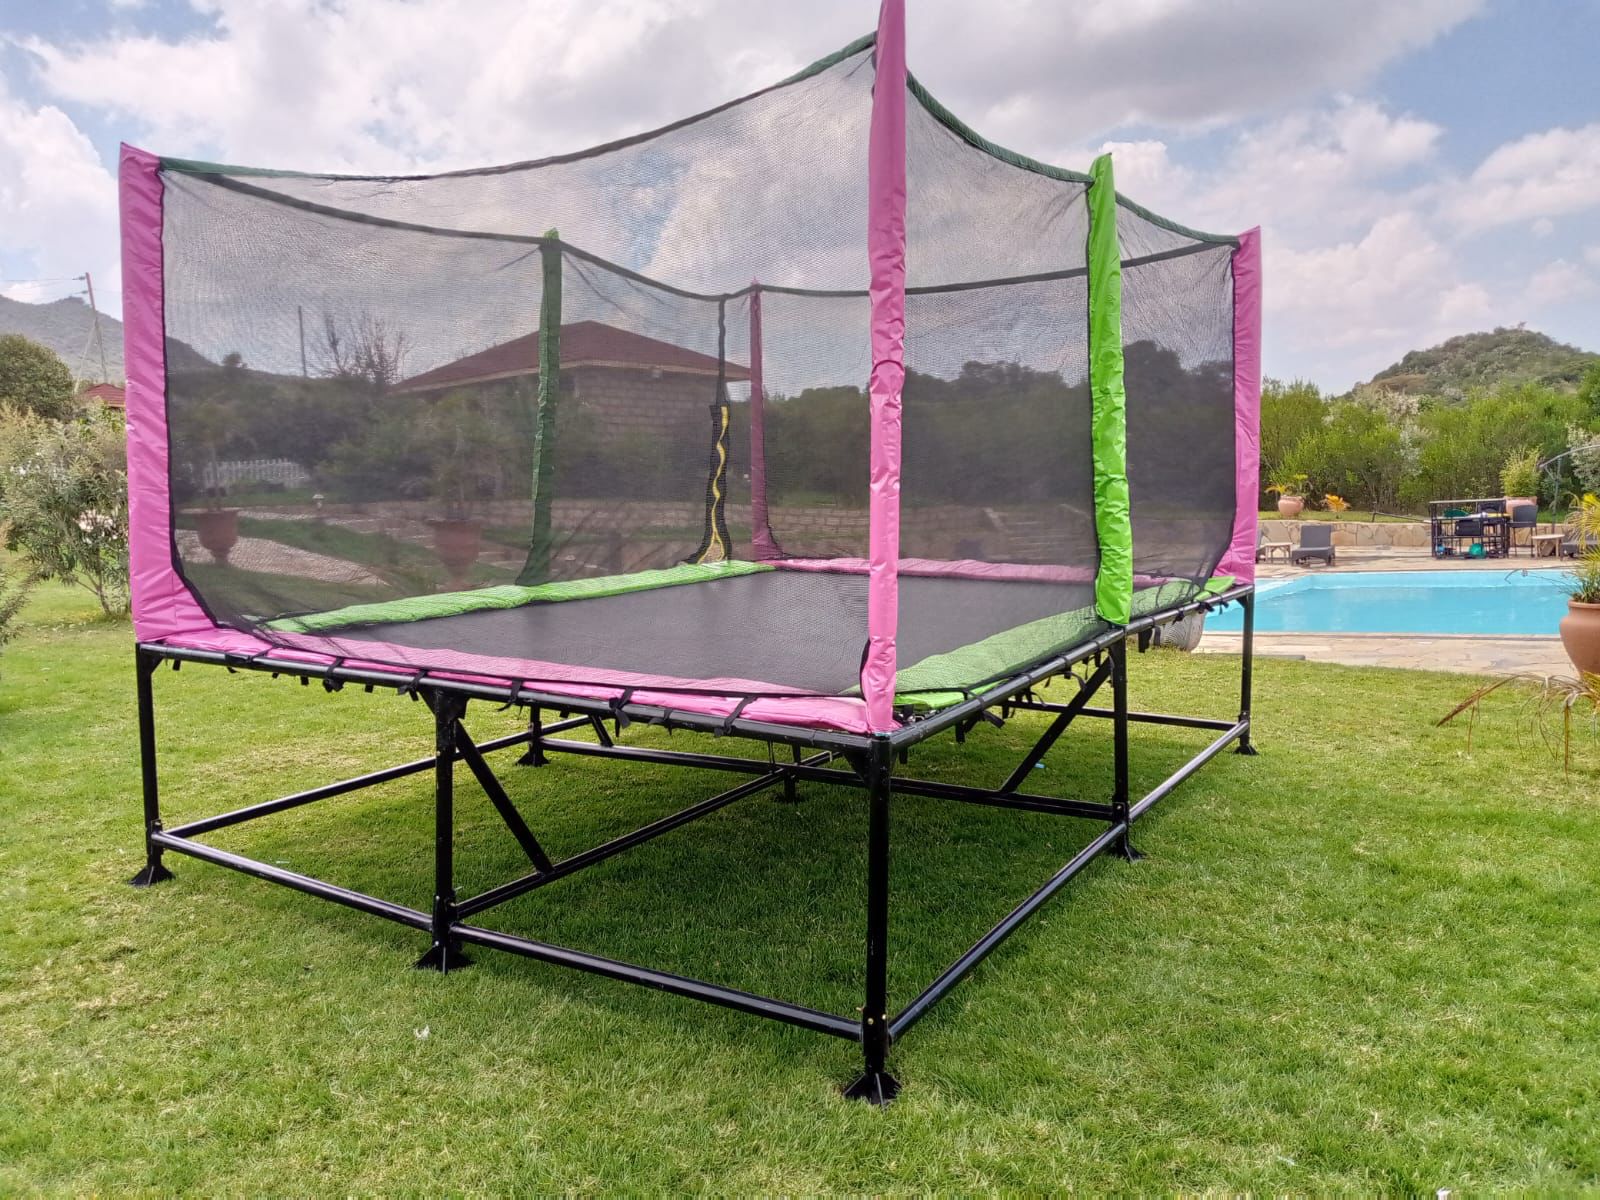 New and used Trampolines for sale in Nairobi Area, Kenya